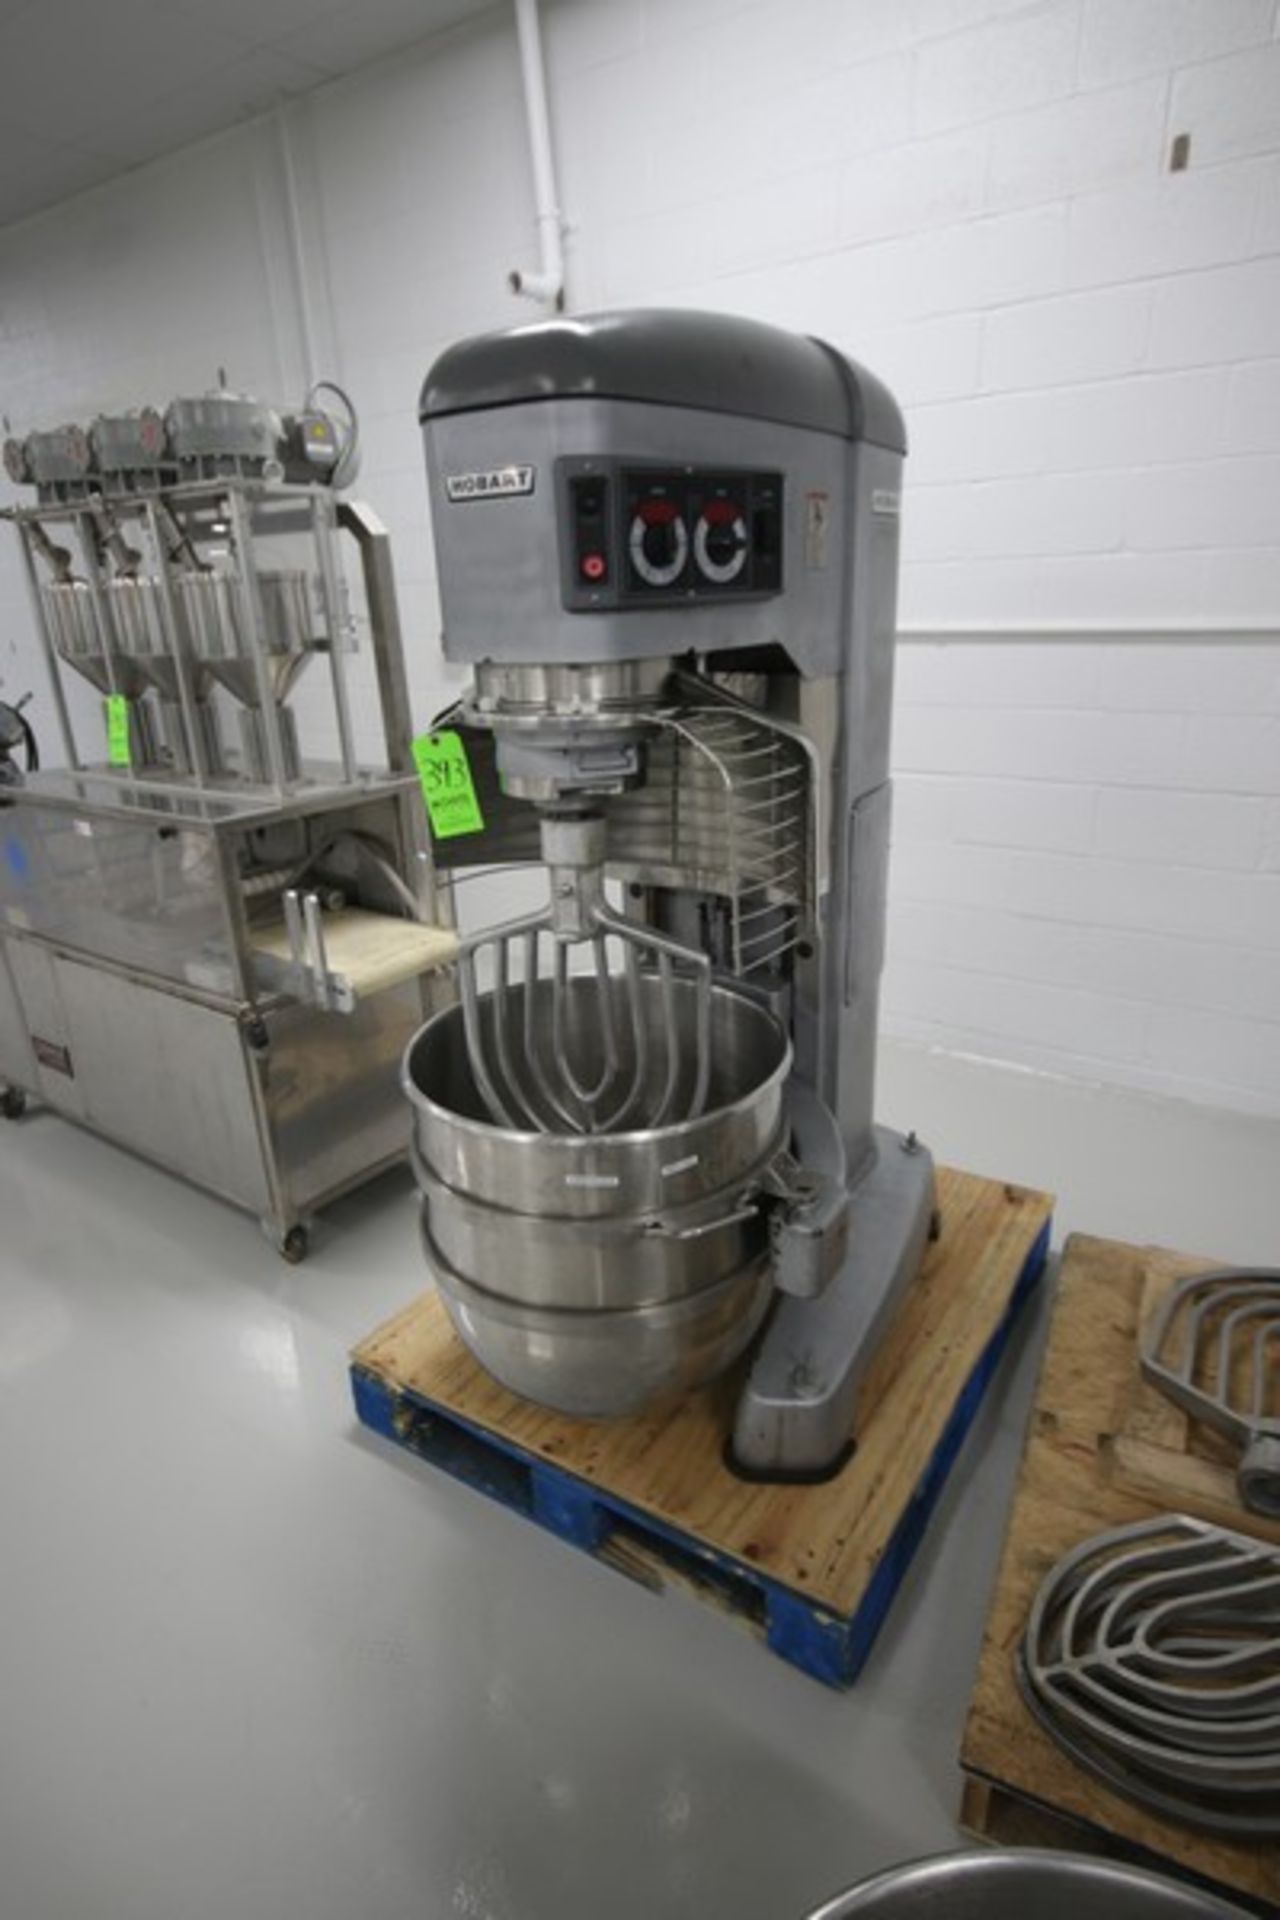 Hobart Legacy Mixer, M/N HL1400, S/N 31-1498-070, with 5 hp Motor, with S/S Mixing Bowl & Whip